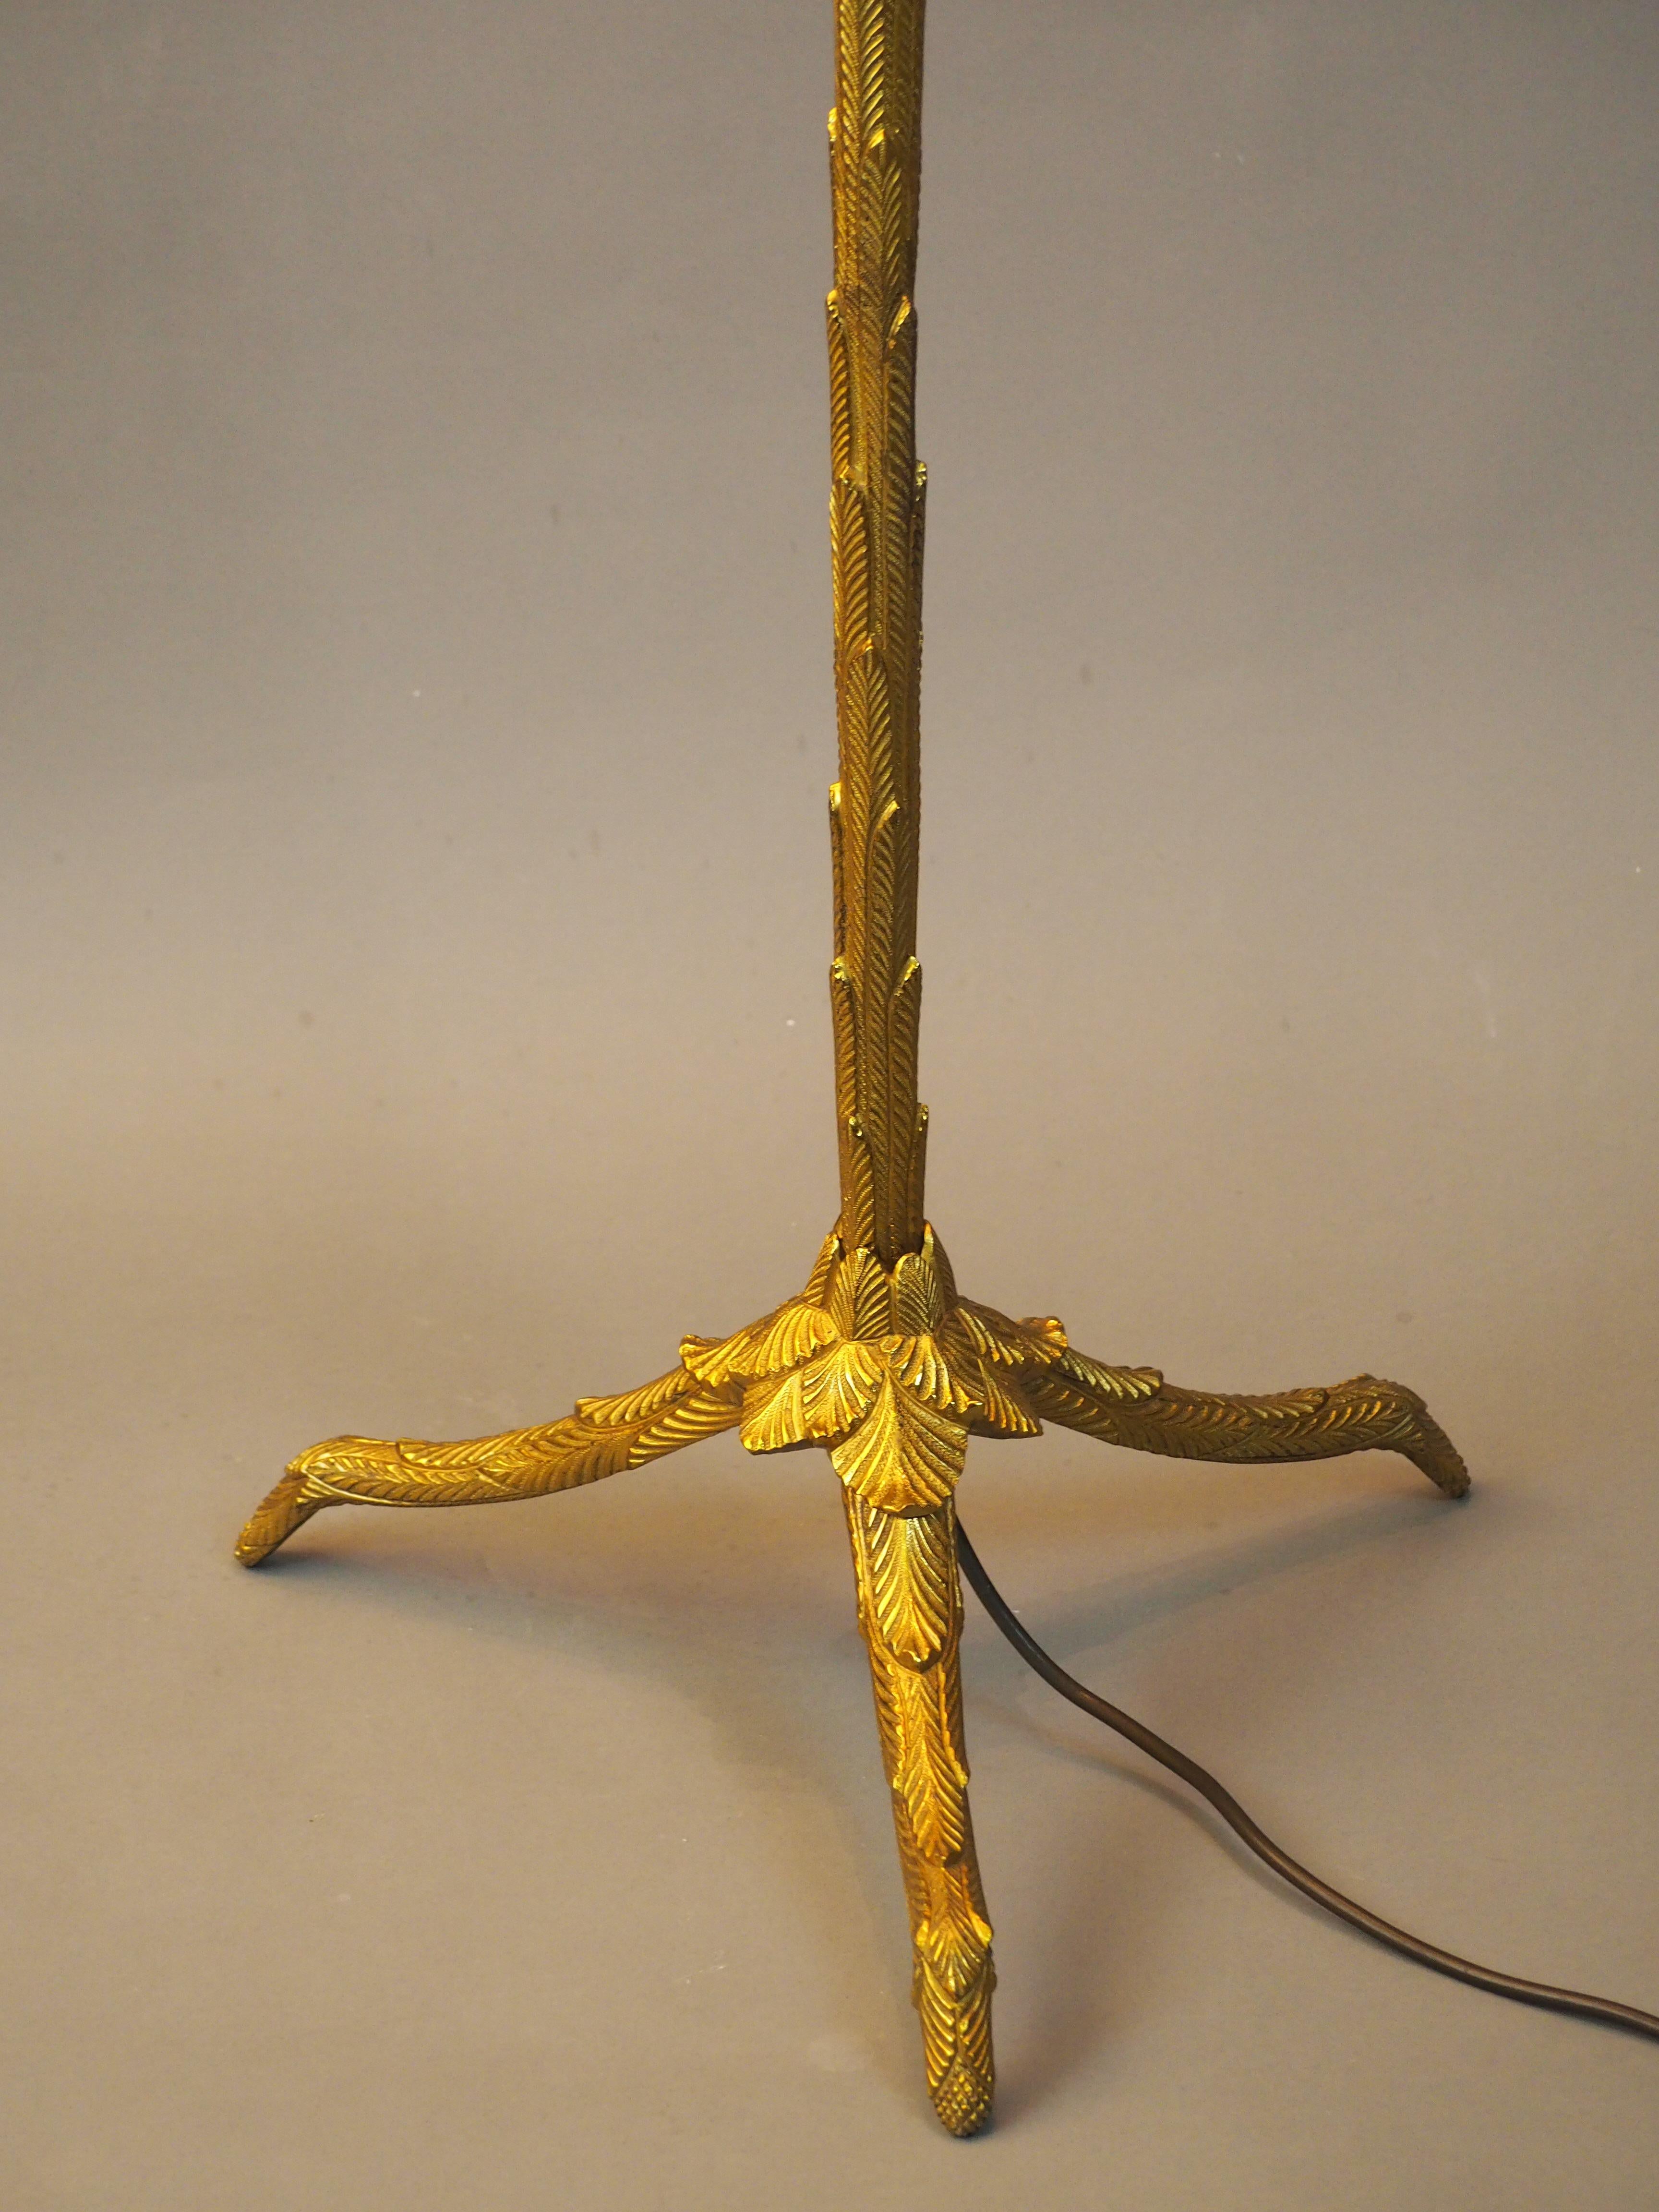 Mid-20th Century French Gilt Bronze Floor Lamp by Maison Baguès, circa 1950s For Sale